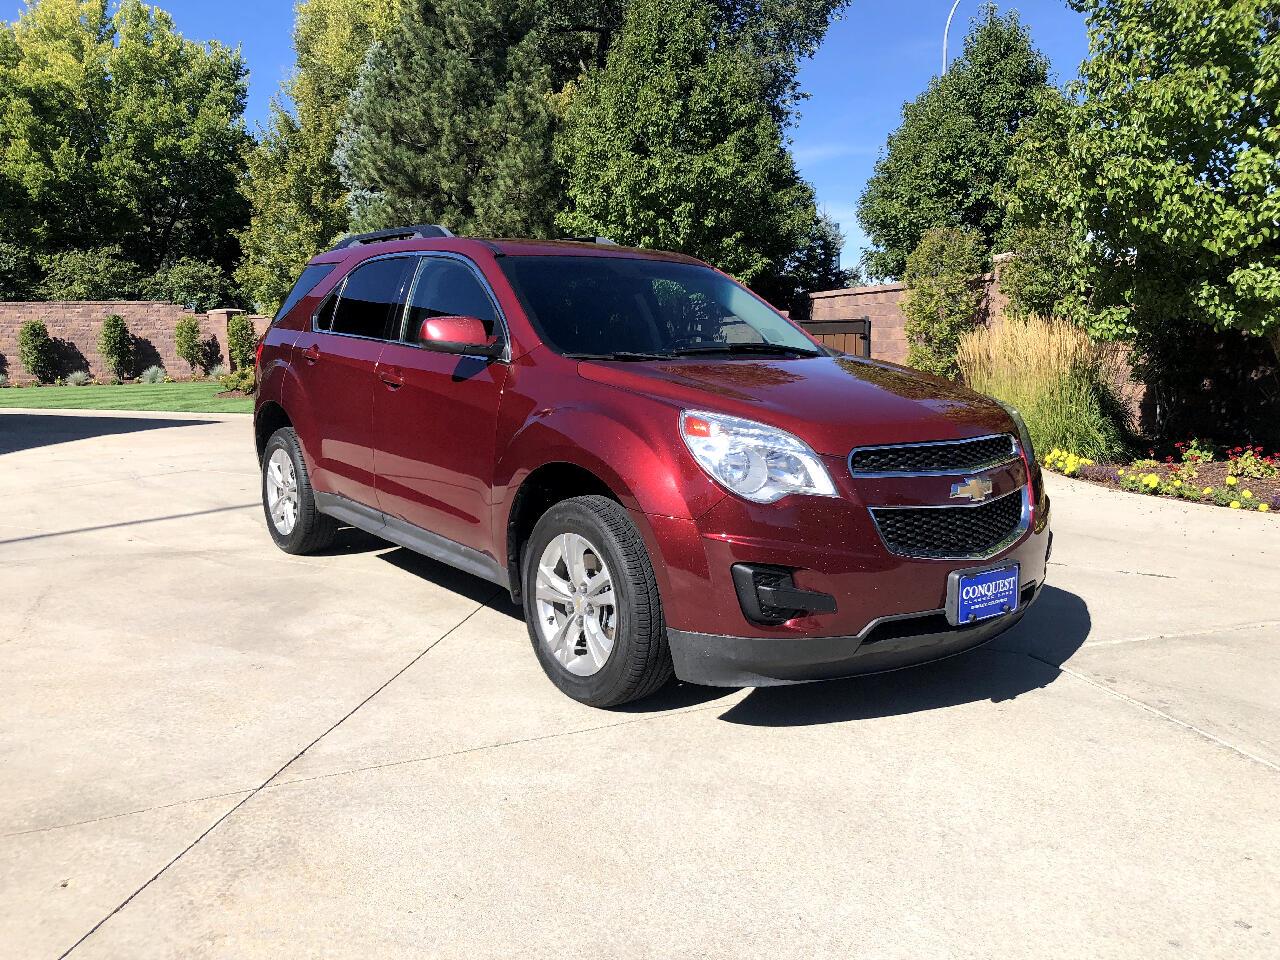 2011 chevy equinox for sale